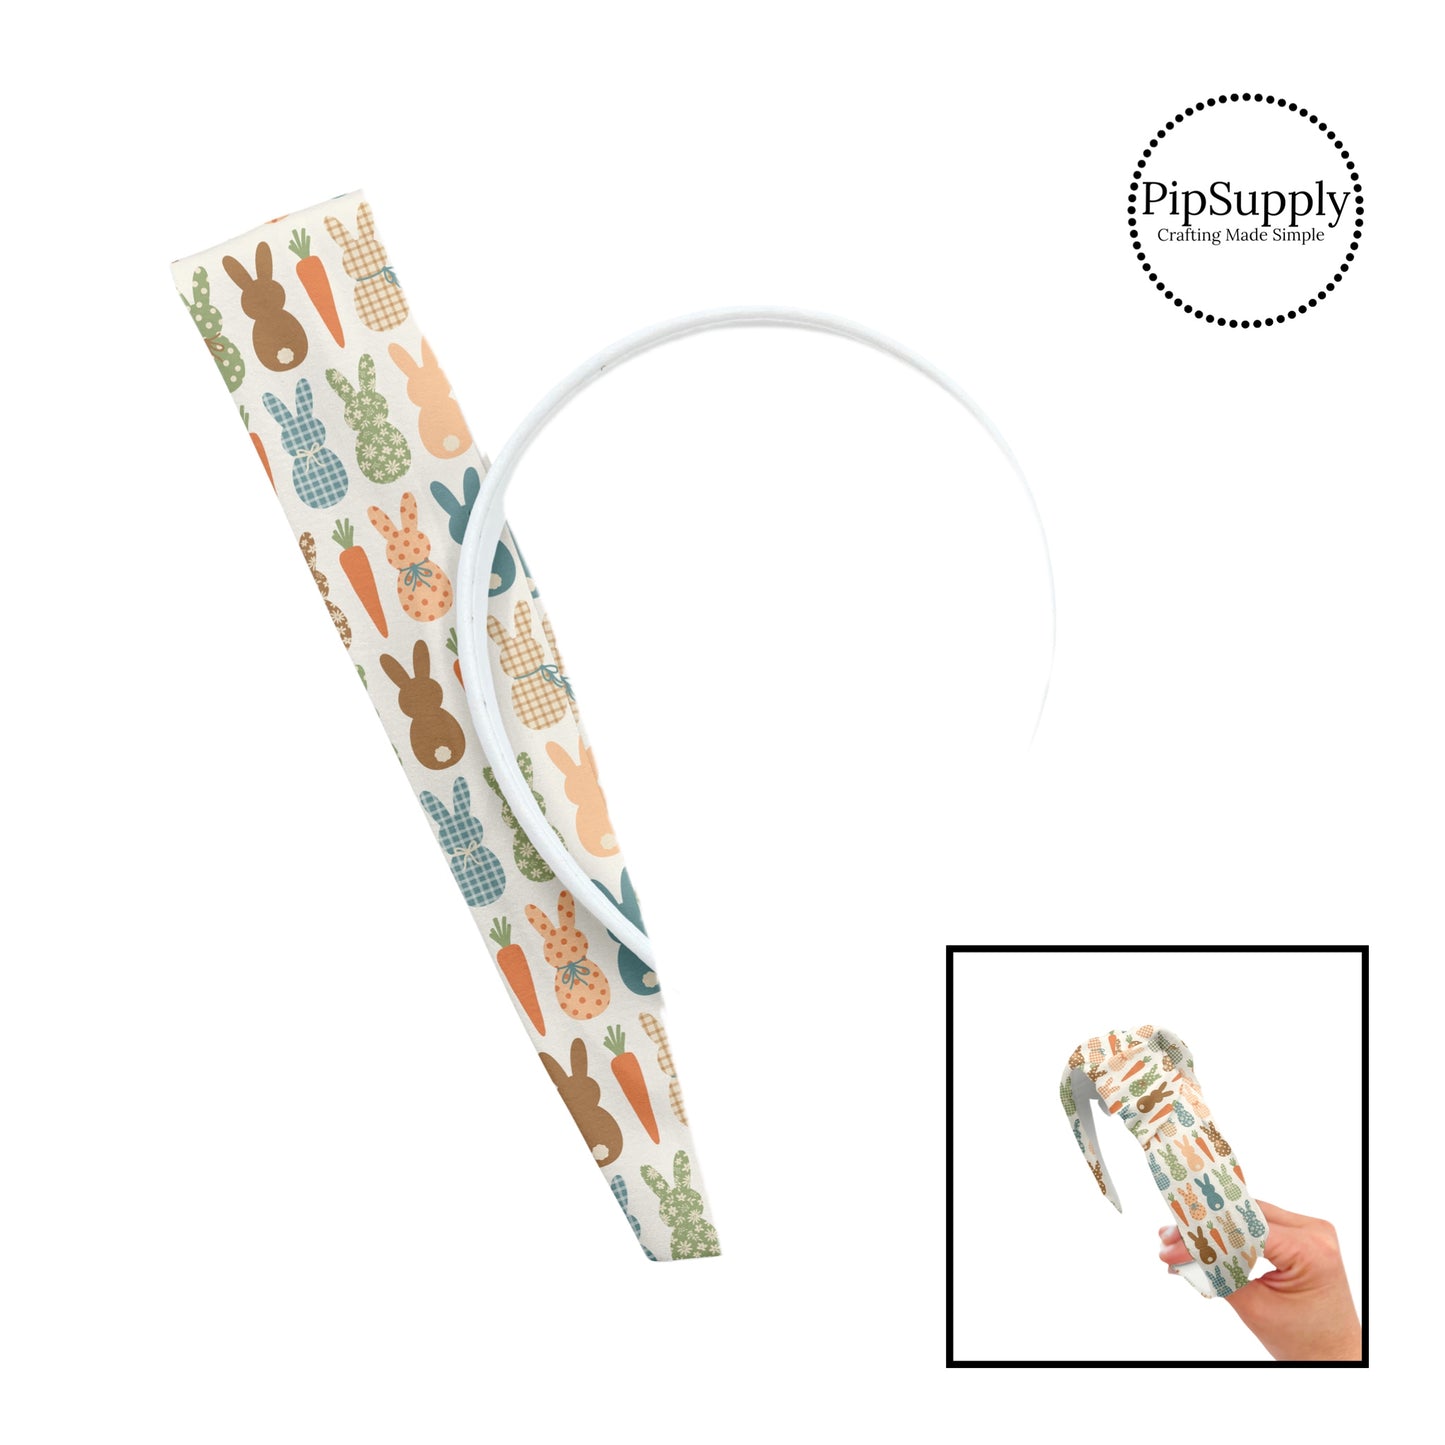 These spring patterned headband kits are easy to assemble and come with everything you need to make your own knotted headband. These kits include a custom printed and sewn fabric strip and a coordinating velvet headband. This cute pattern features earth toned multi-colored bunnies and carrots on cream. 